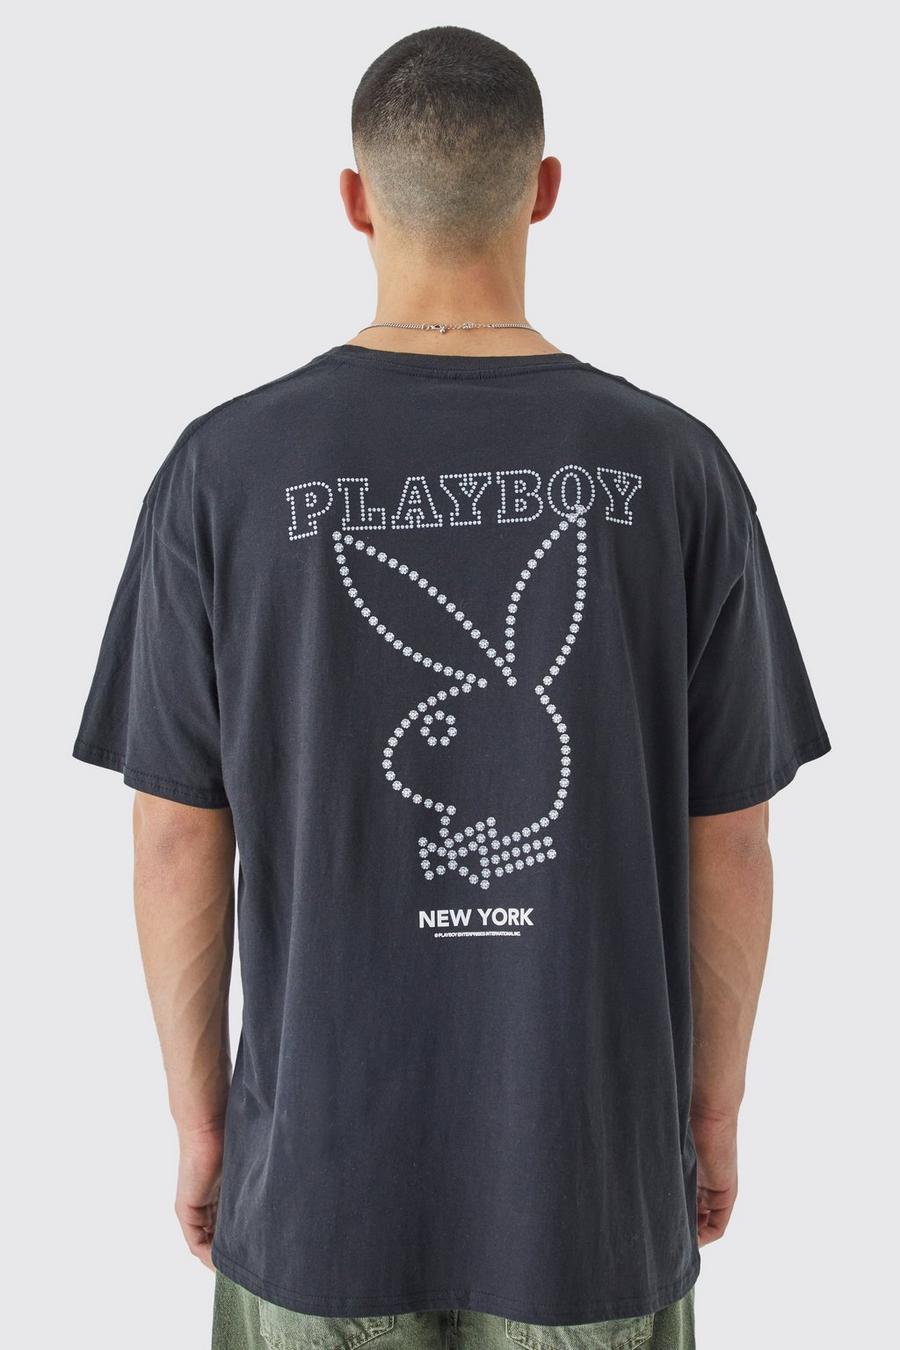 T-shirt oversize ufficiale di Playboy con strass, Black